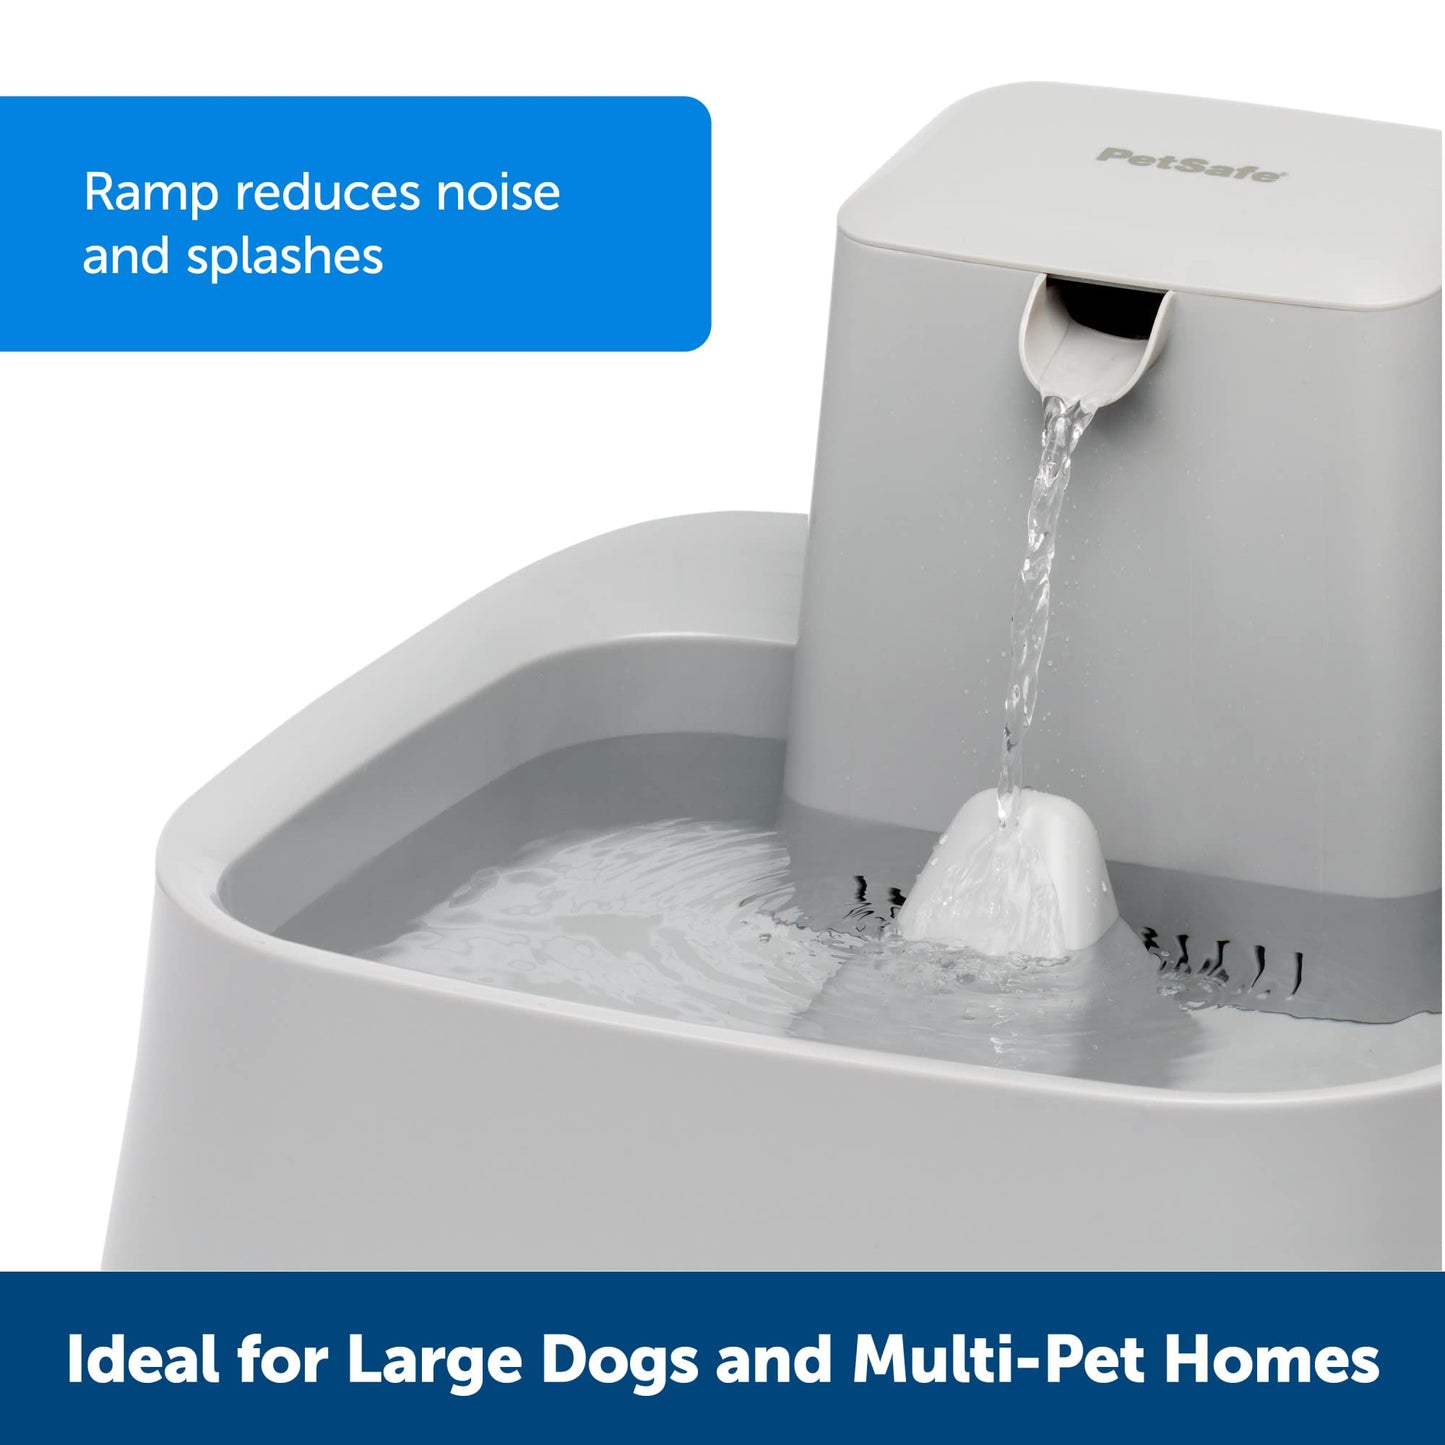 PetSafe 2 Gallon Automatic Water Fountain for Cats, Dogs - With Pump, Filter, Dishwasher Safe